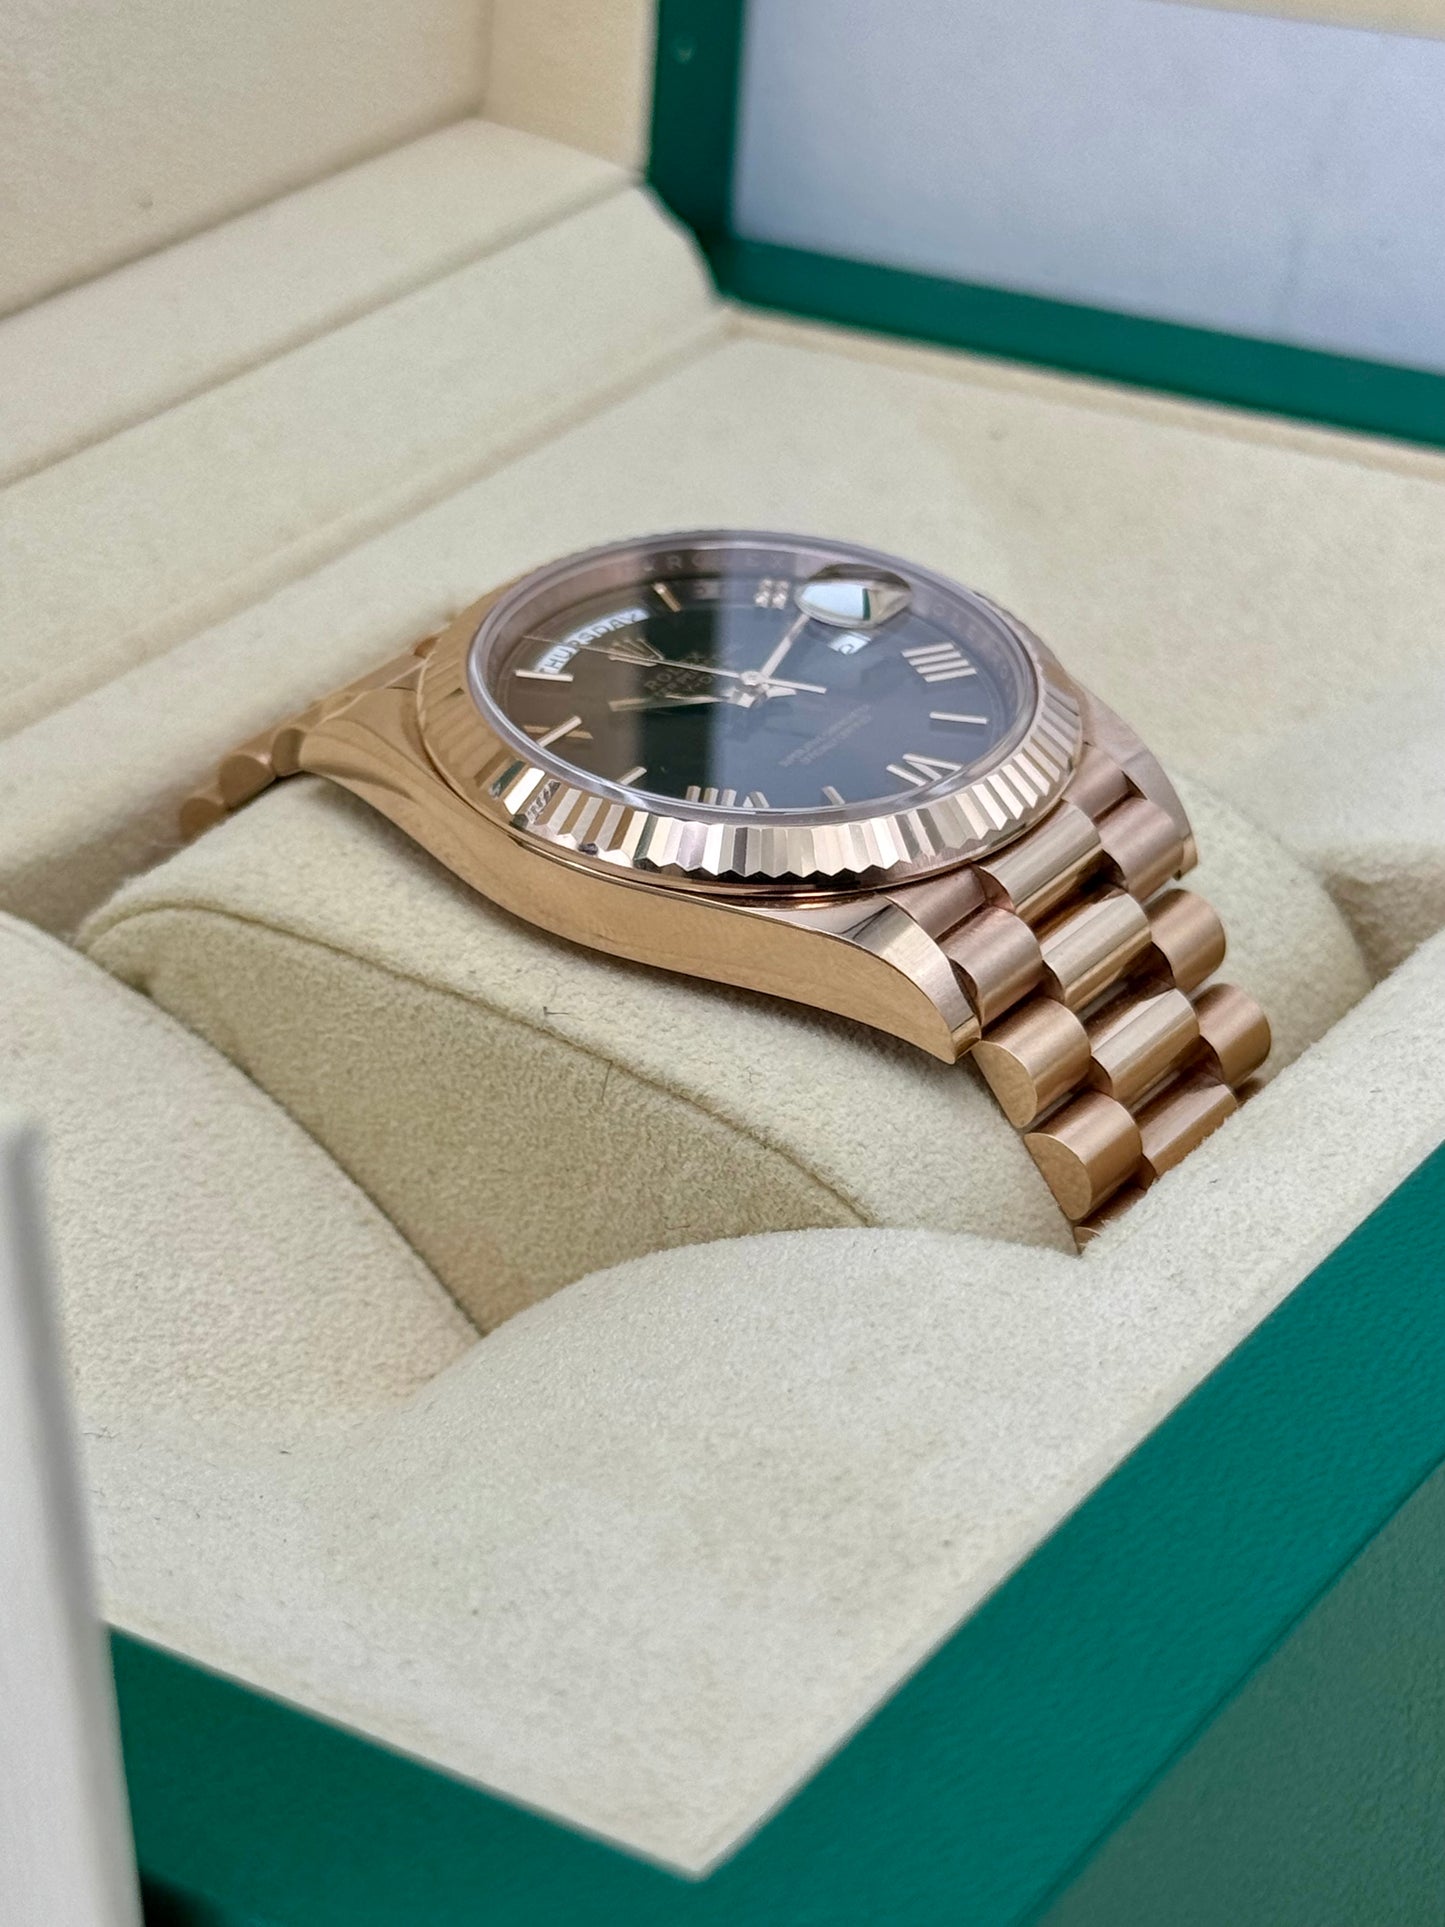 2021 Rolex Day-Date 40mm 228235 Presidential Rose Gold Chocolate Dial - MyWatchLLC